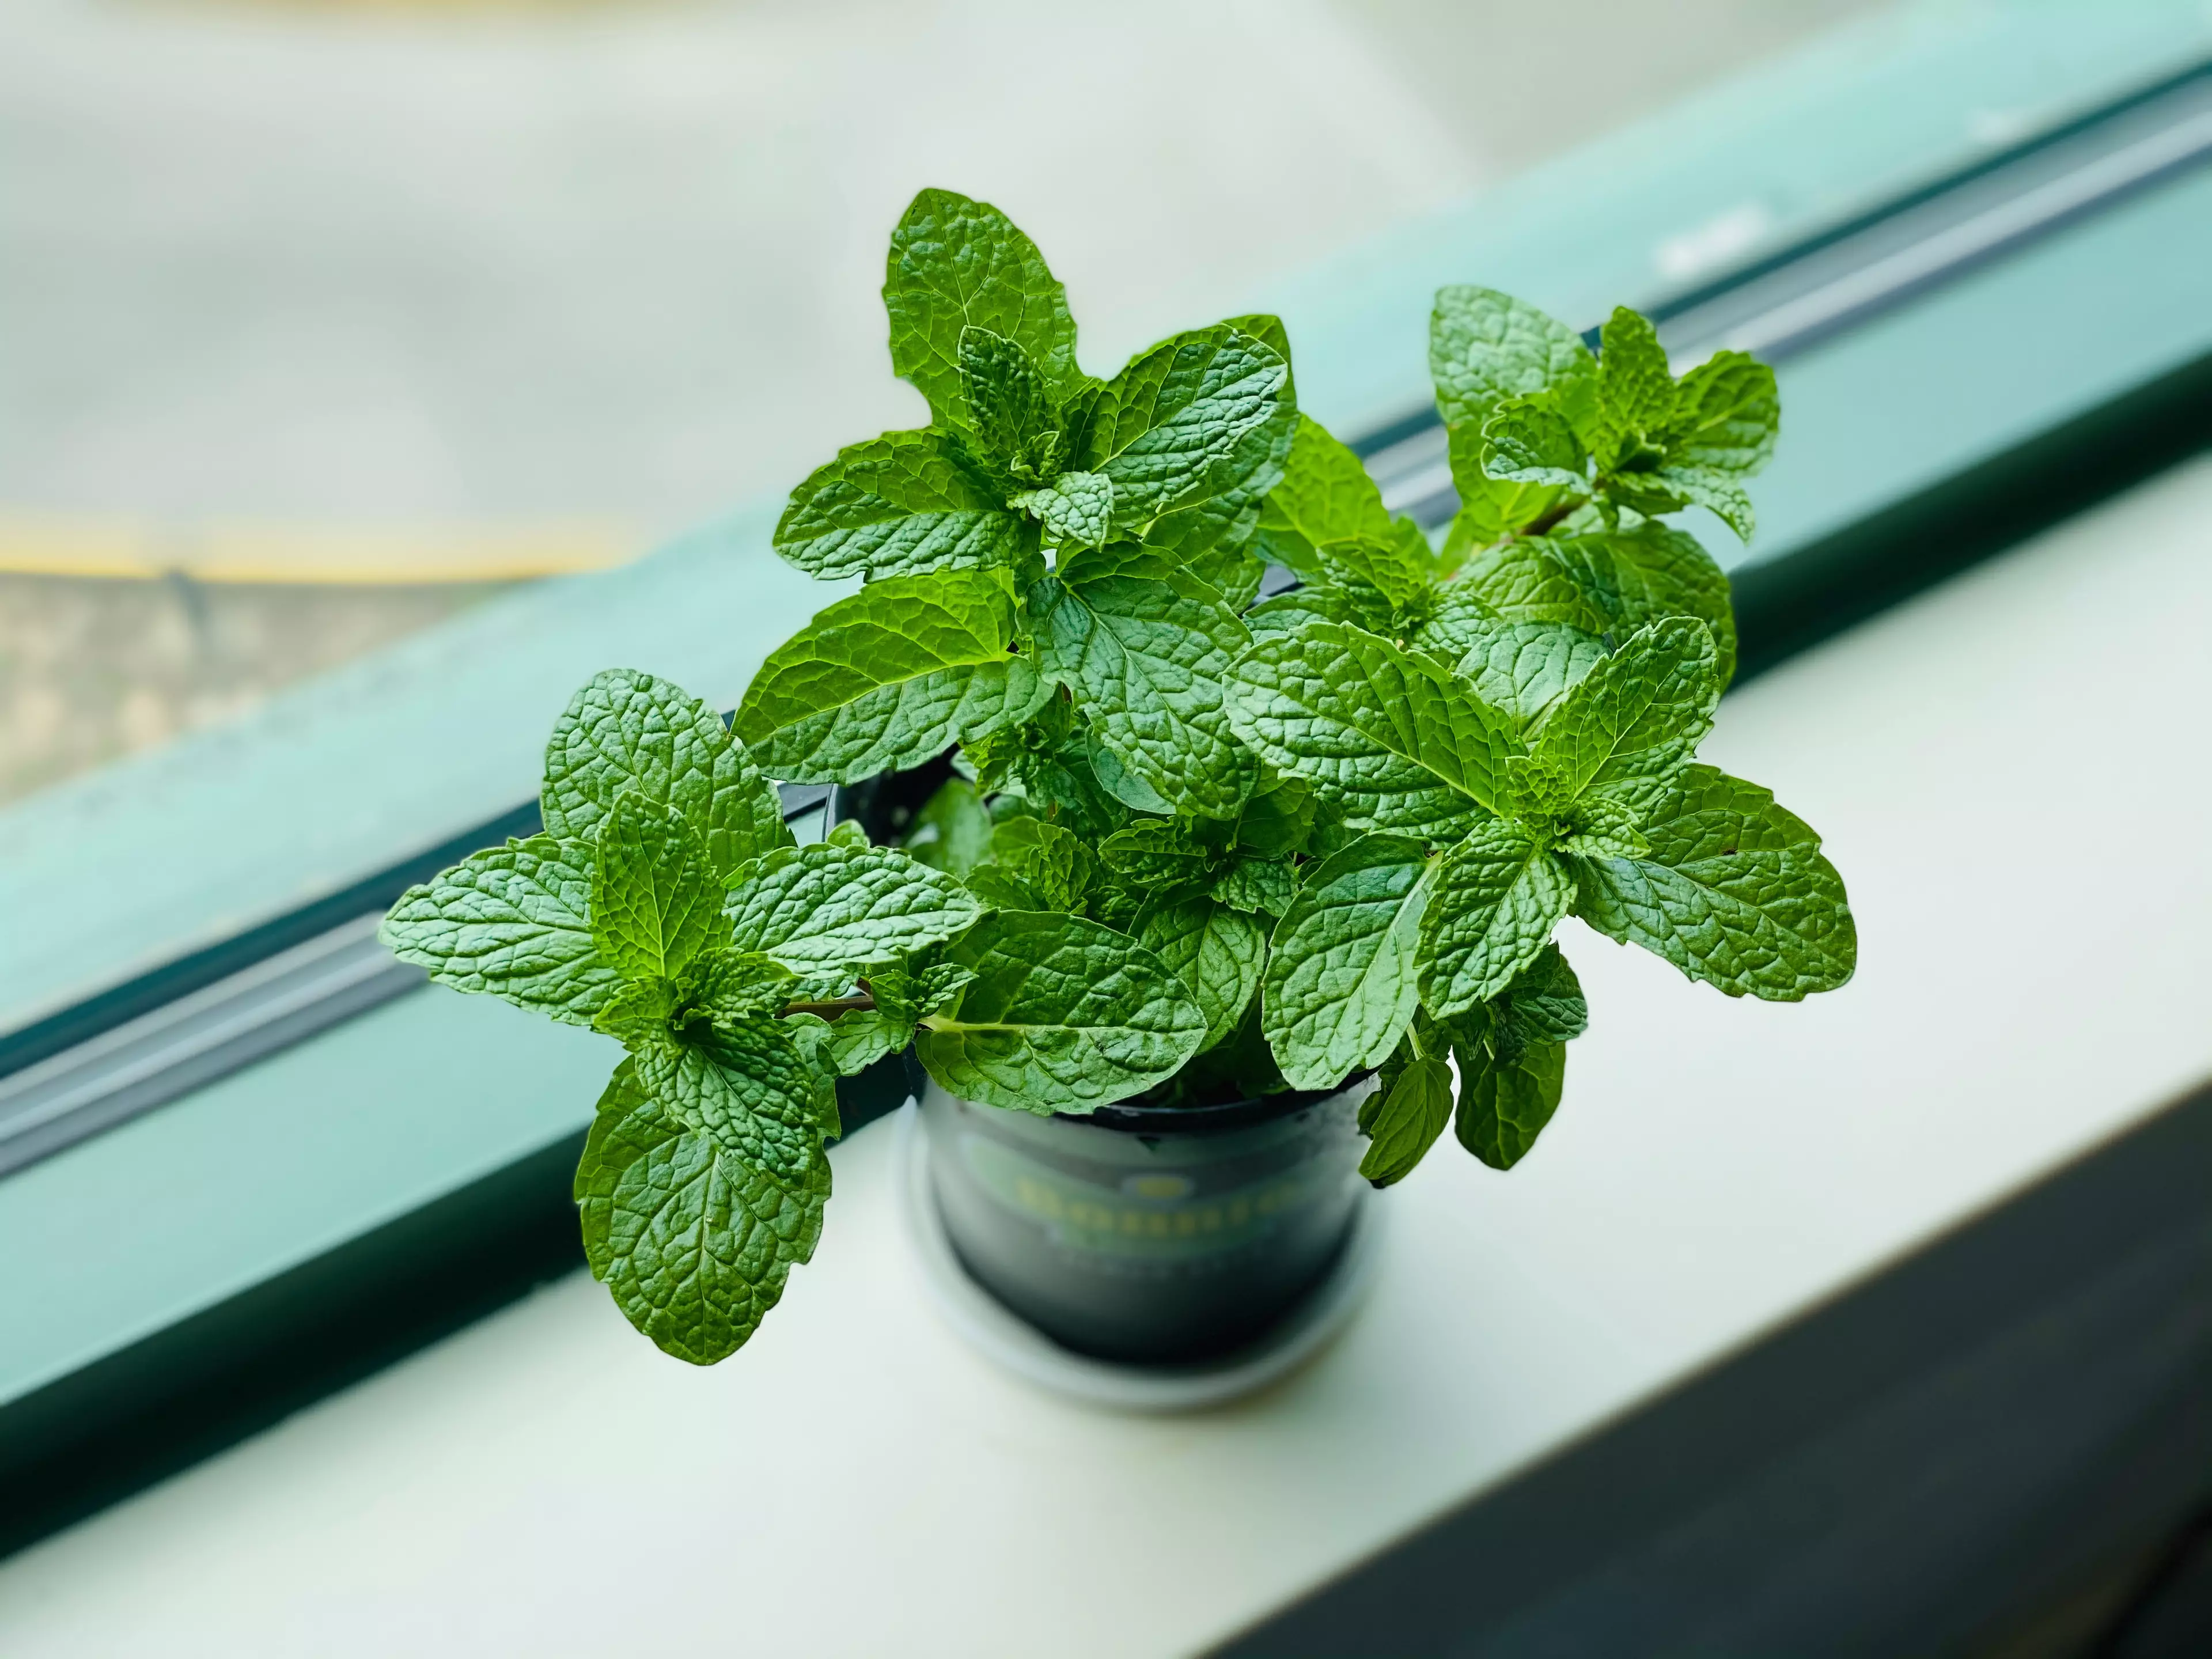 Mint could be the answer (